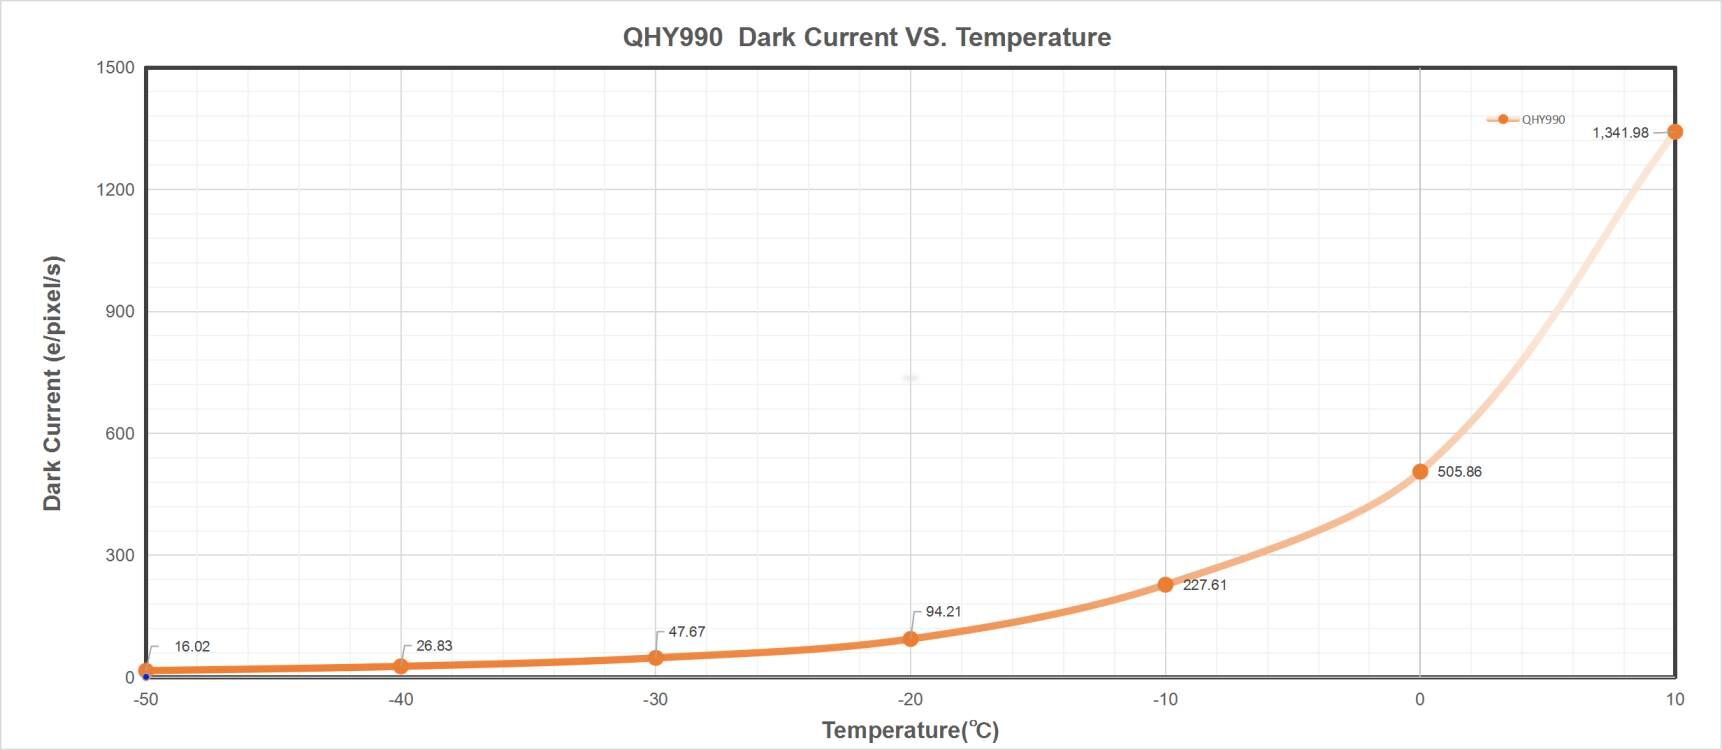 Advanced Cooling Technology in QHY990 Short-Wave Infrared Camera: Enhancing Image Quality through Dark Current Reduction